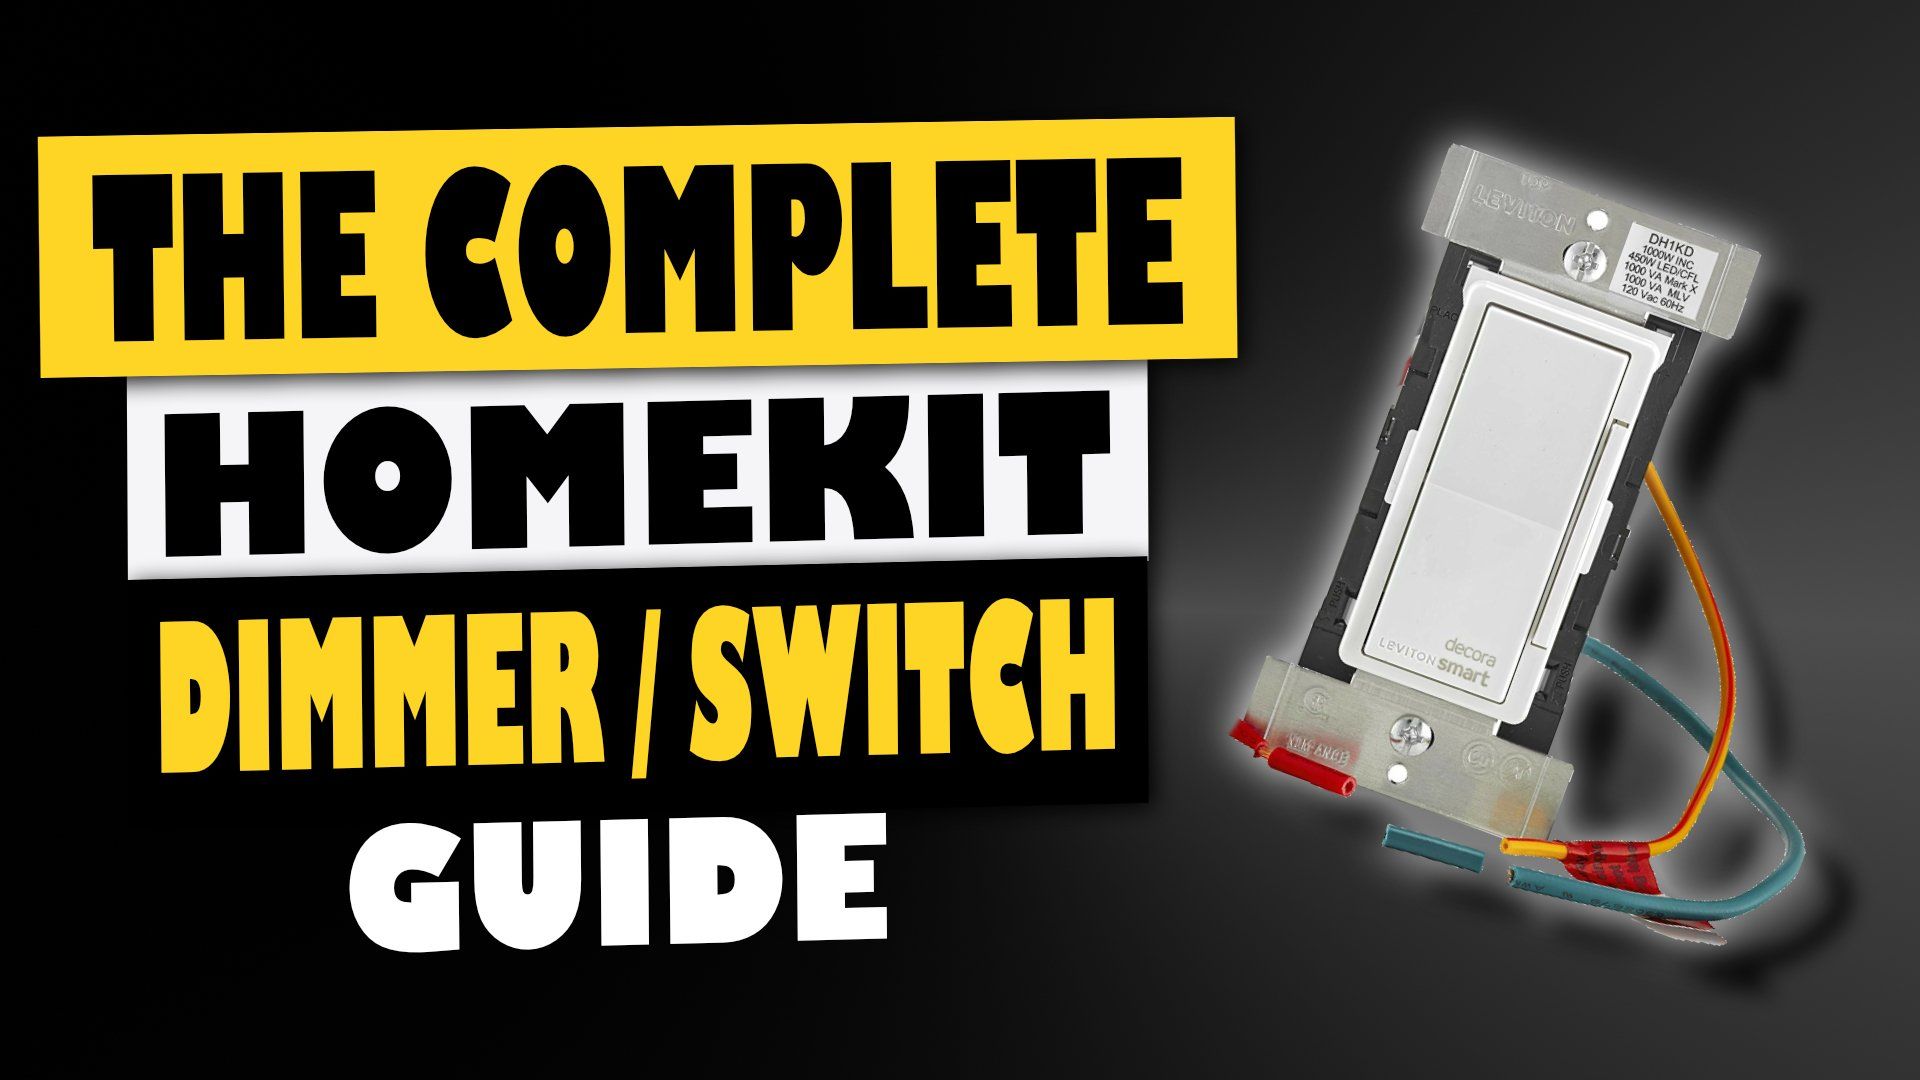 Complete Homekit dimmer switches guide